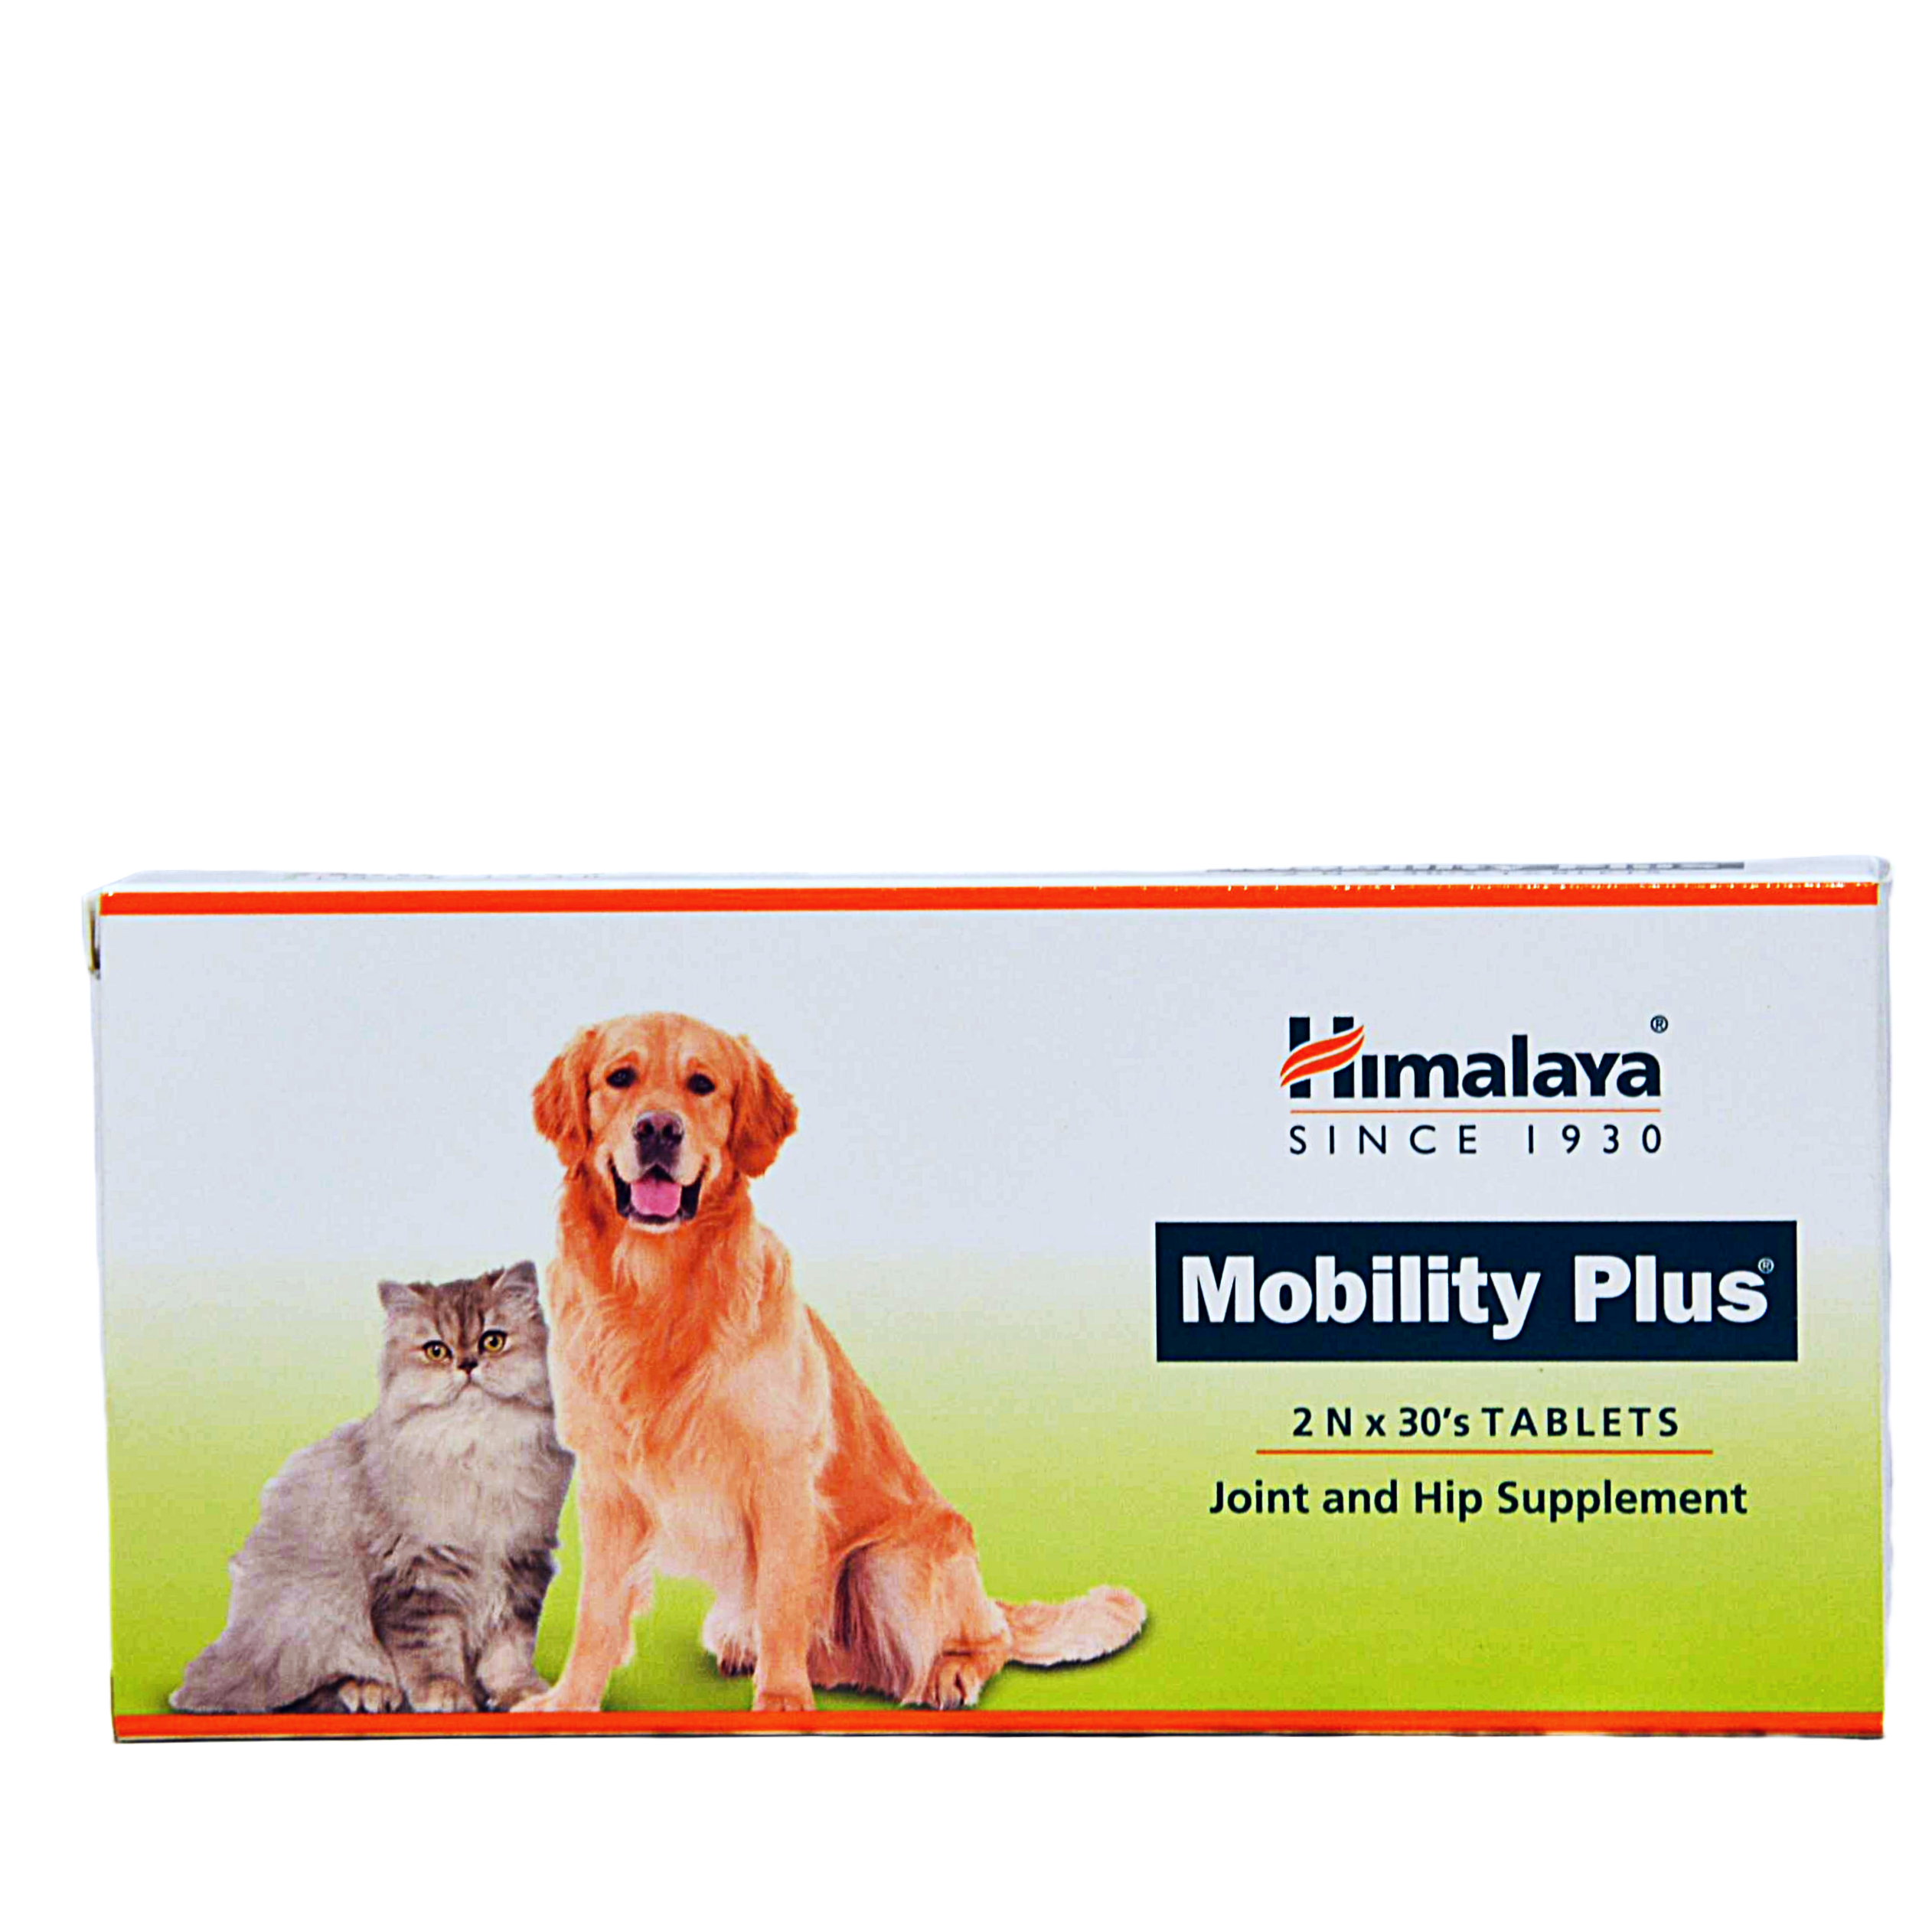 Himalaya Mobility Plus 30tablets joint & hip supplement